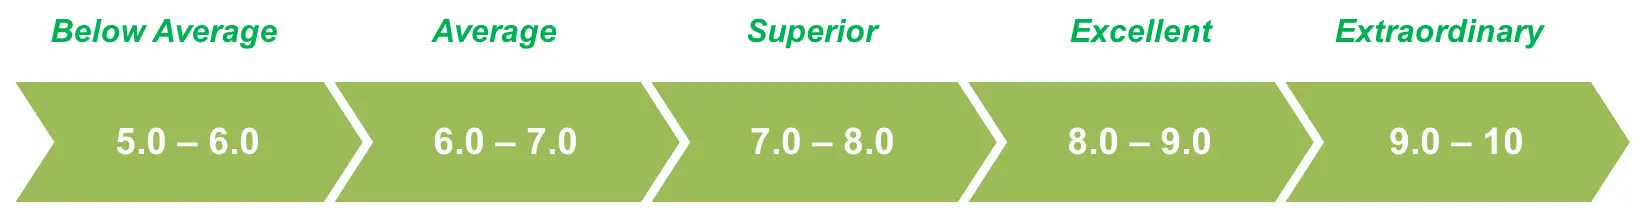 electric toothbrush rating score